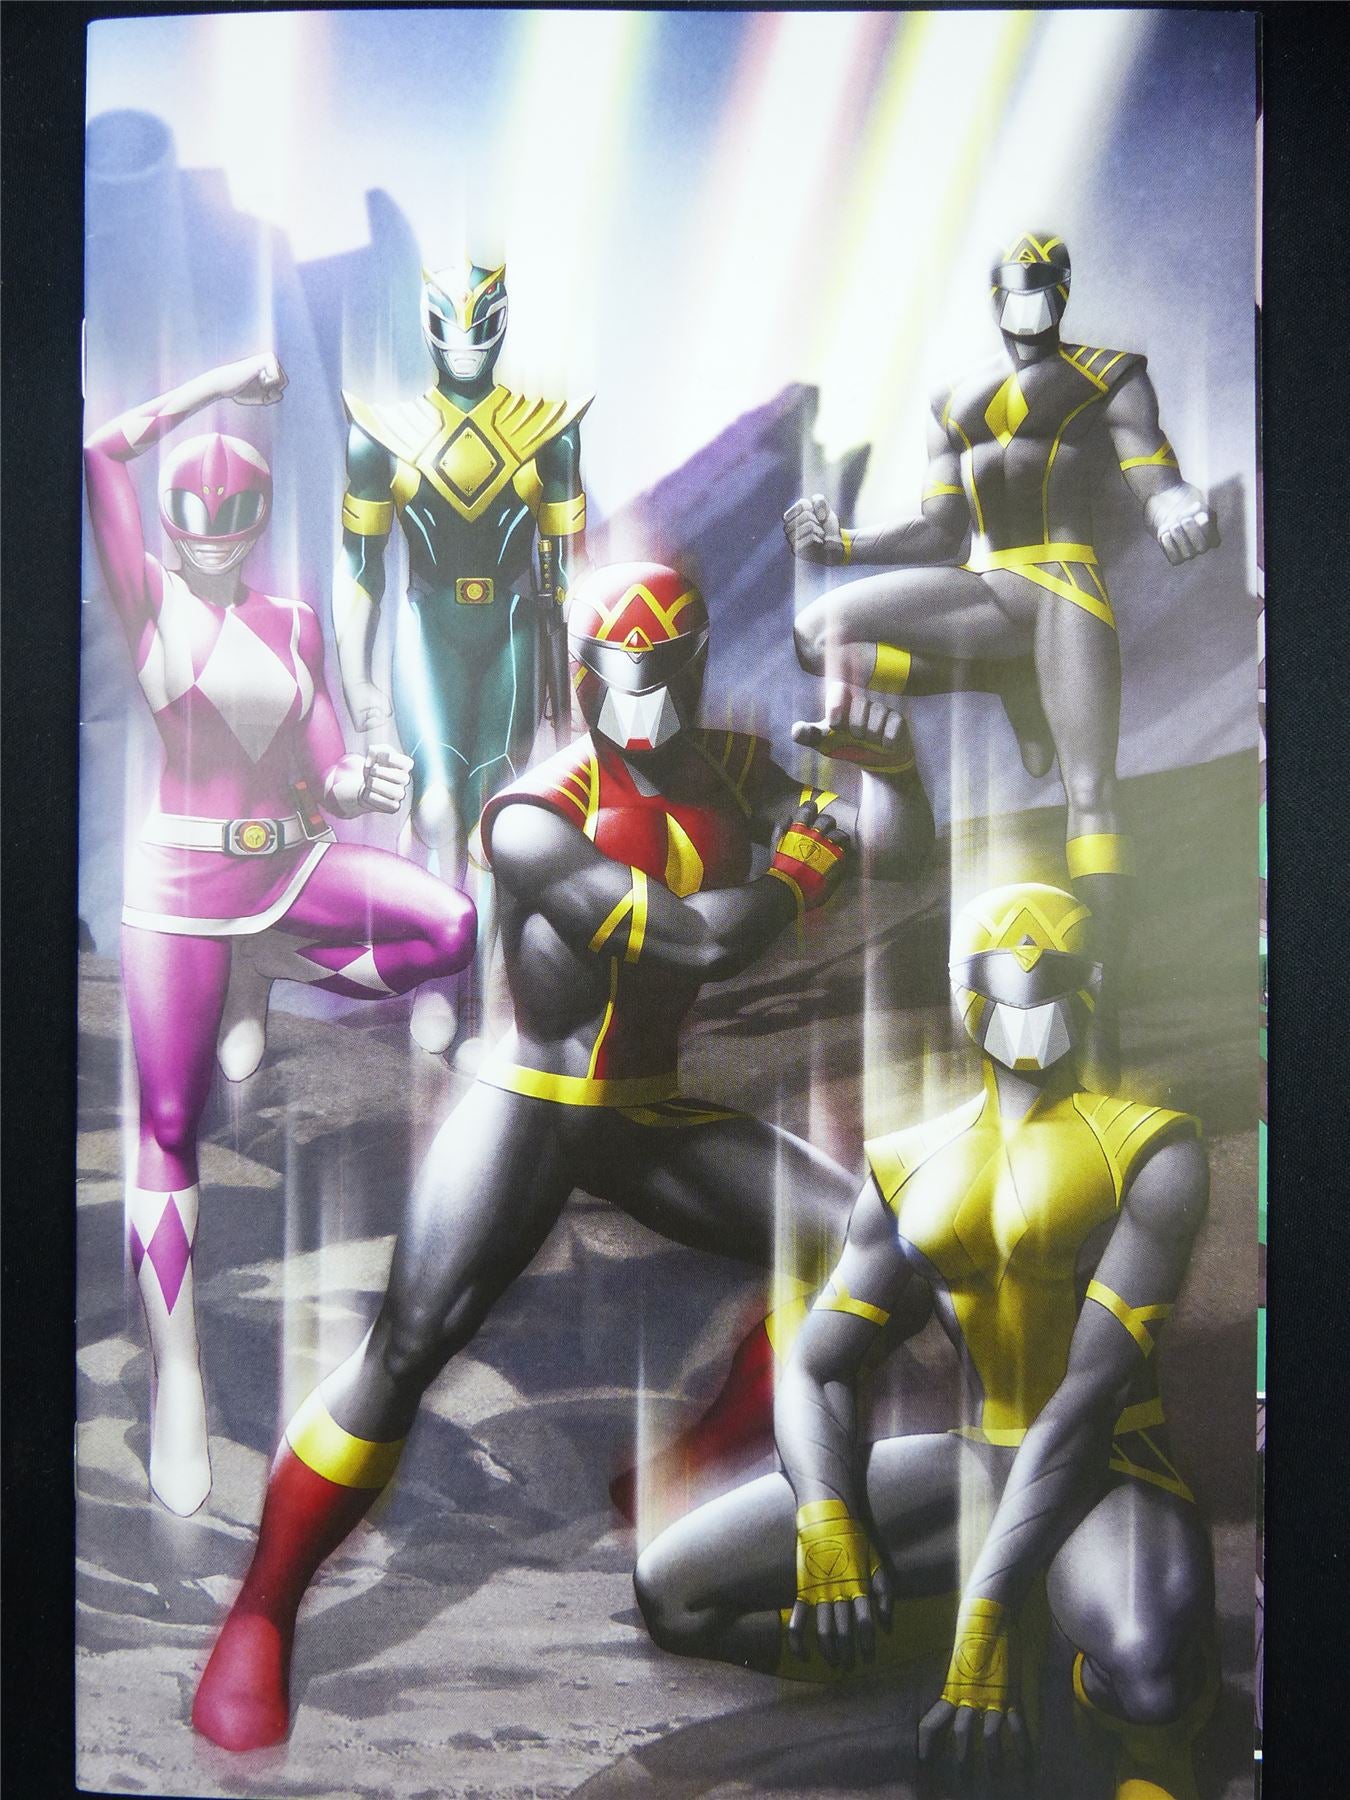 Mighty Morphin POWER Rangers #1 One-Per-Store Variant - Boom! Comic #507